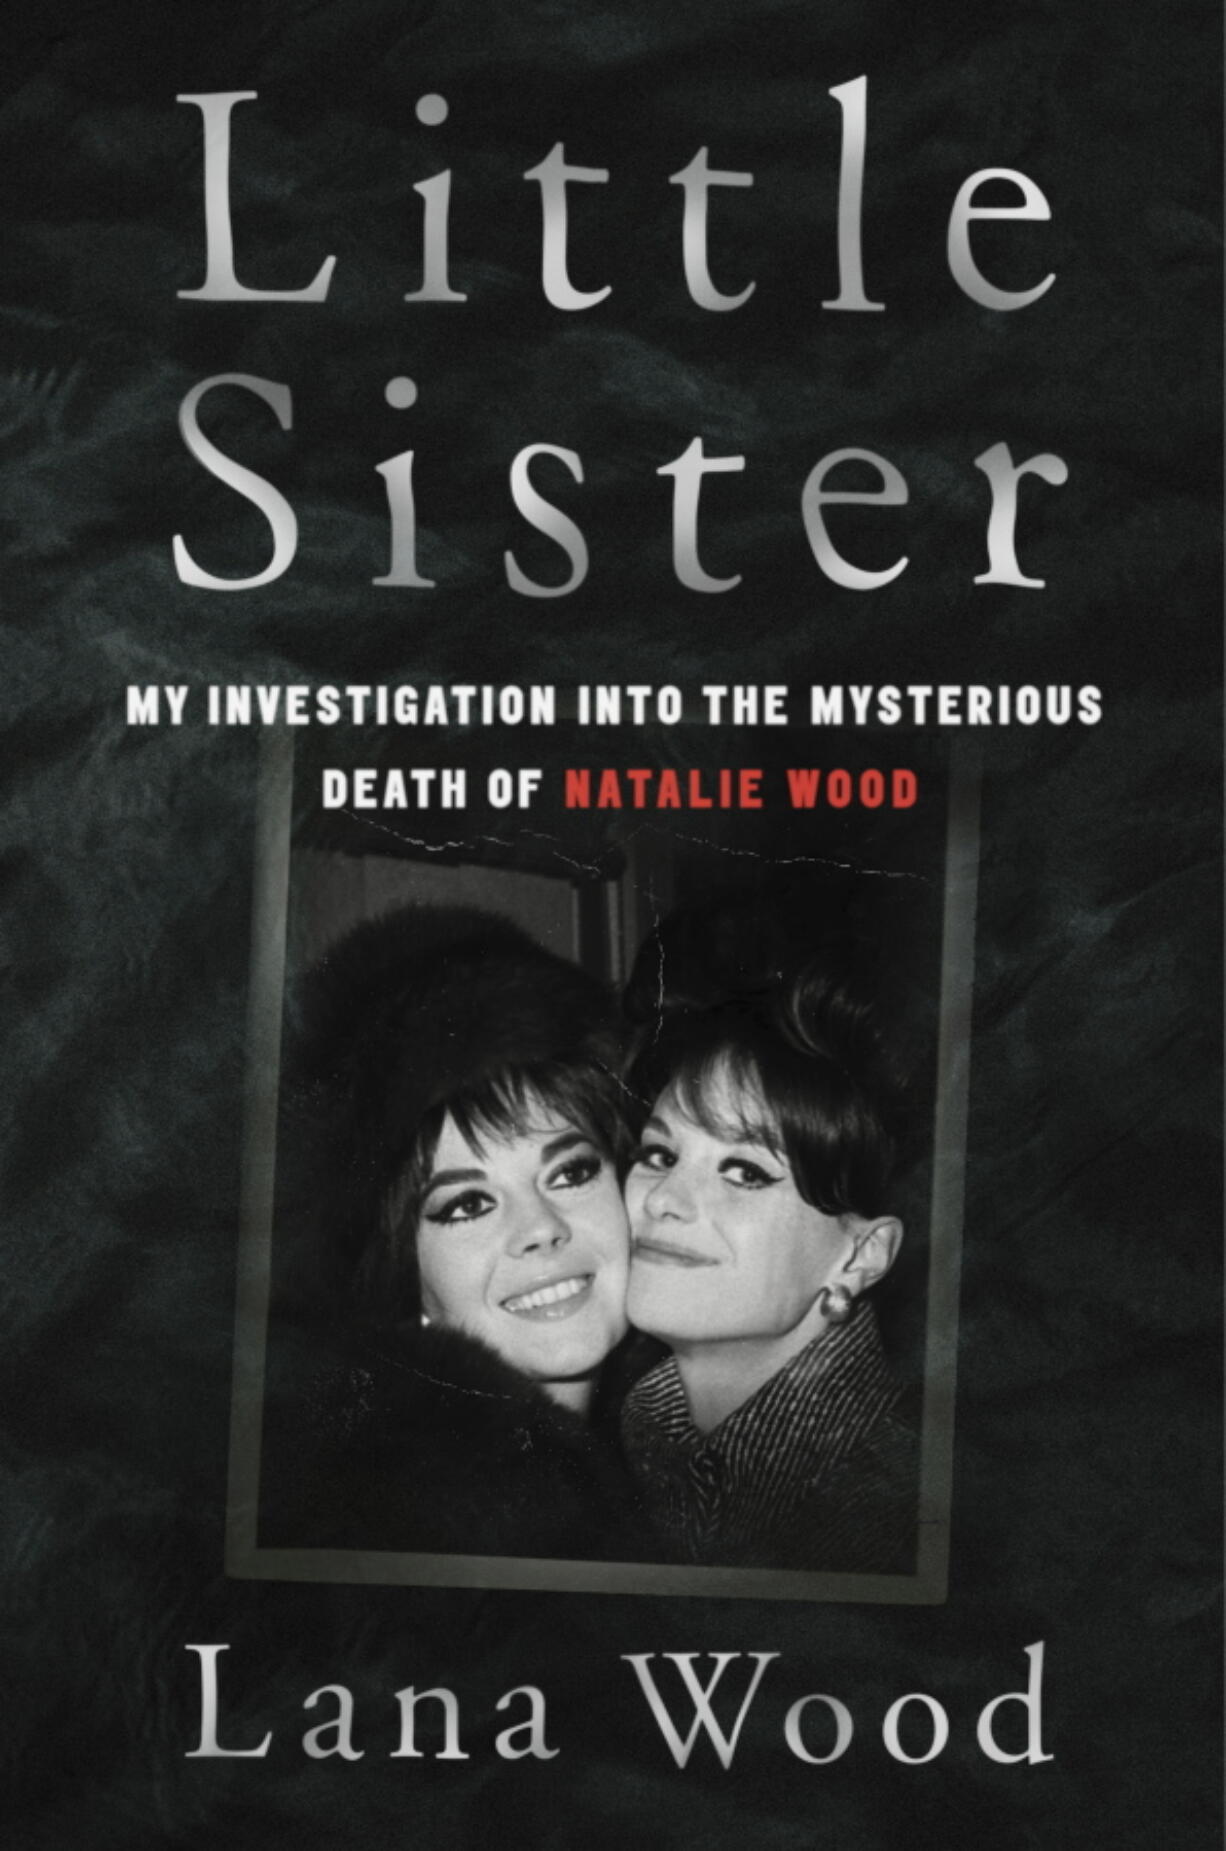 "Little Sister: My Investigation into the Mysterious Death of Natalie Wood" by Lana Wood.